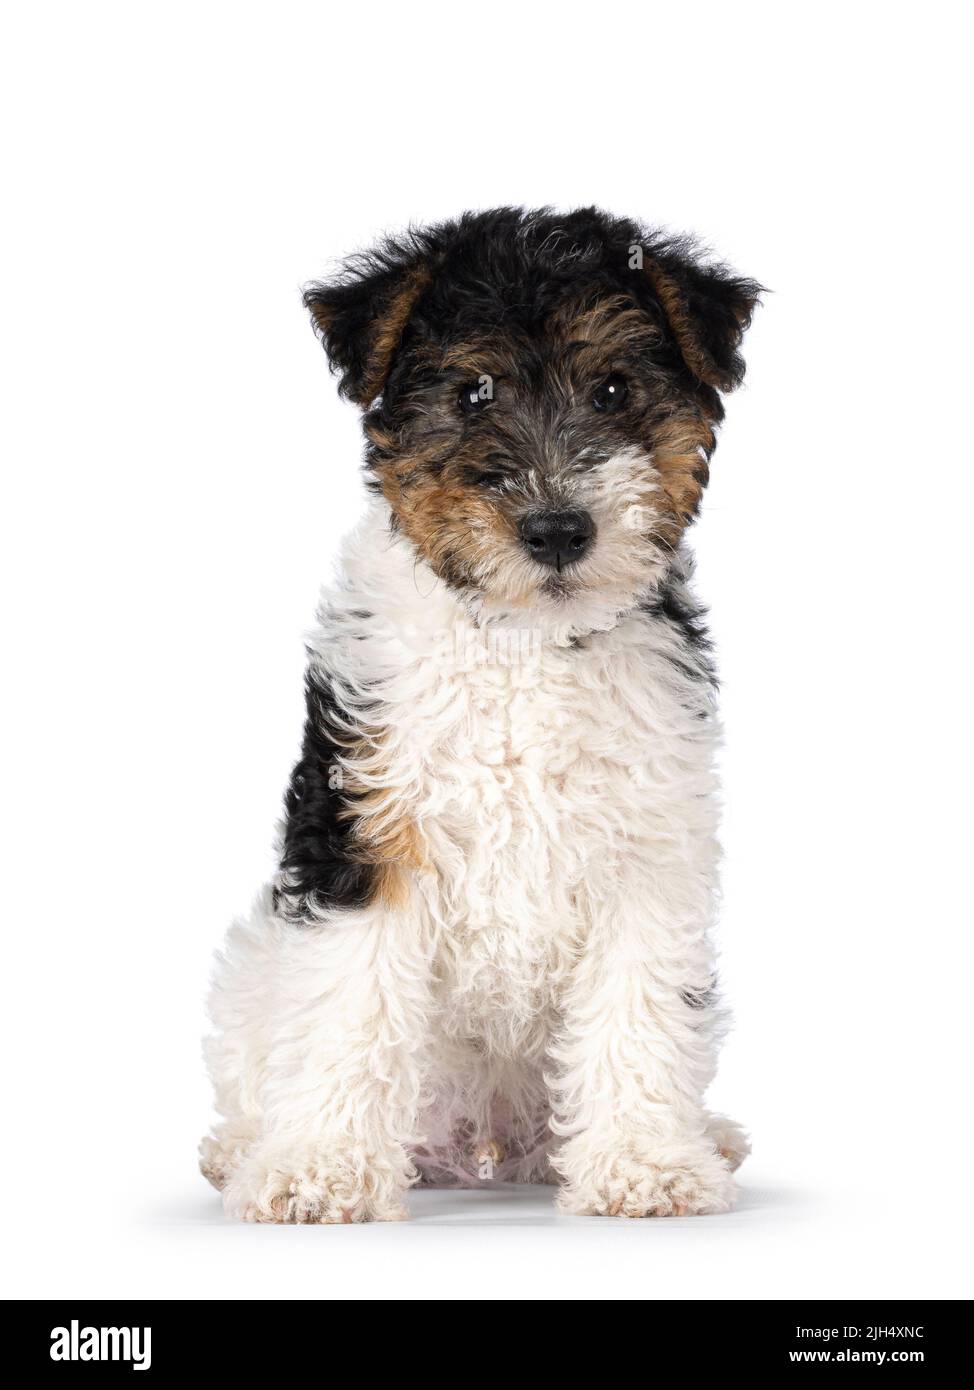 Cute Fox Terrier dog pup, sitting looking straight towards the camera. Isolated on a white background. Stock Photo